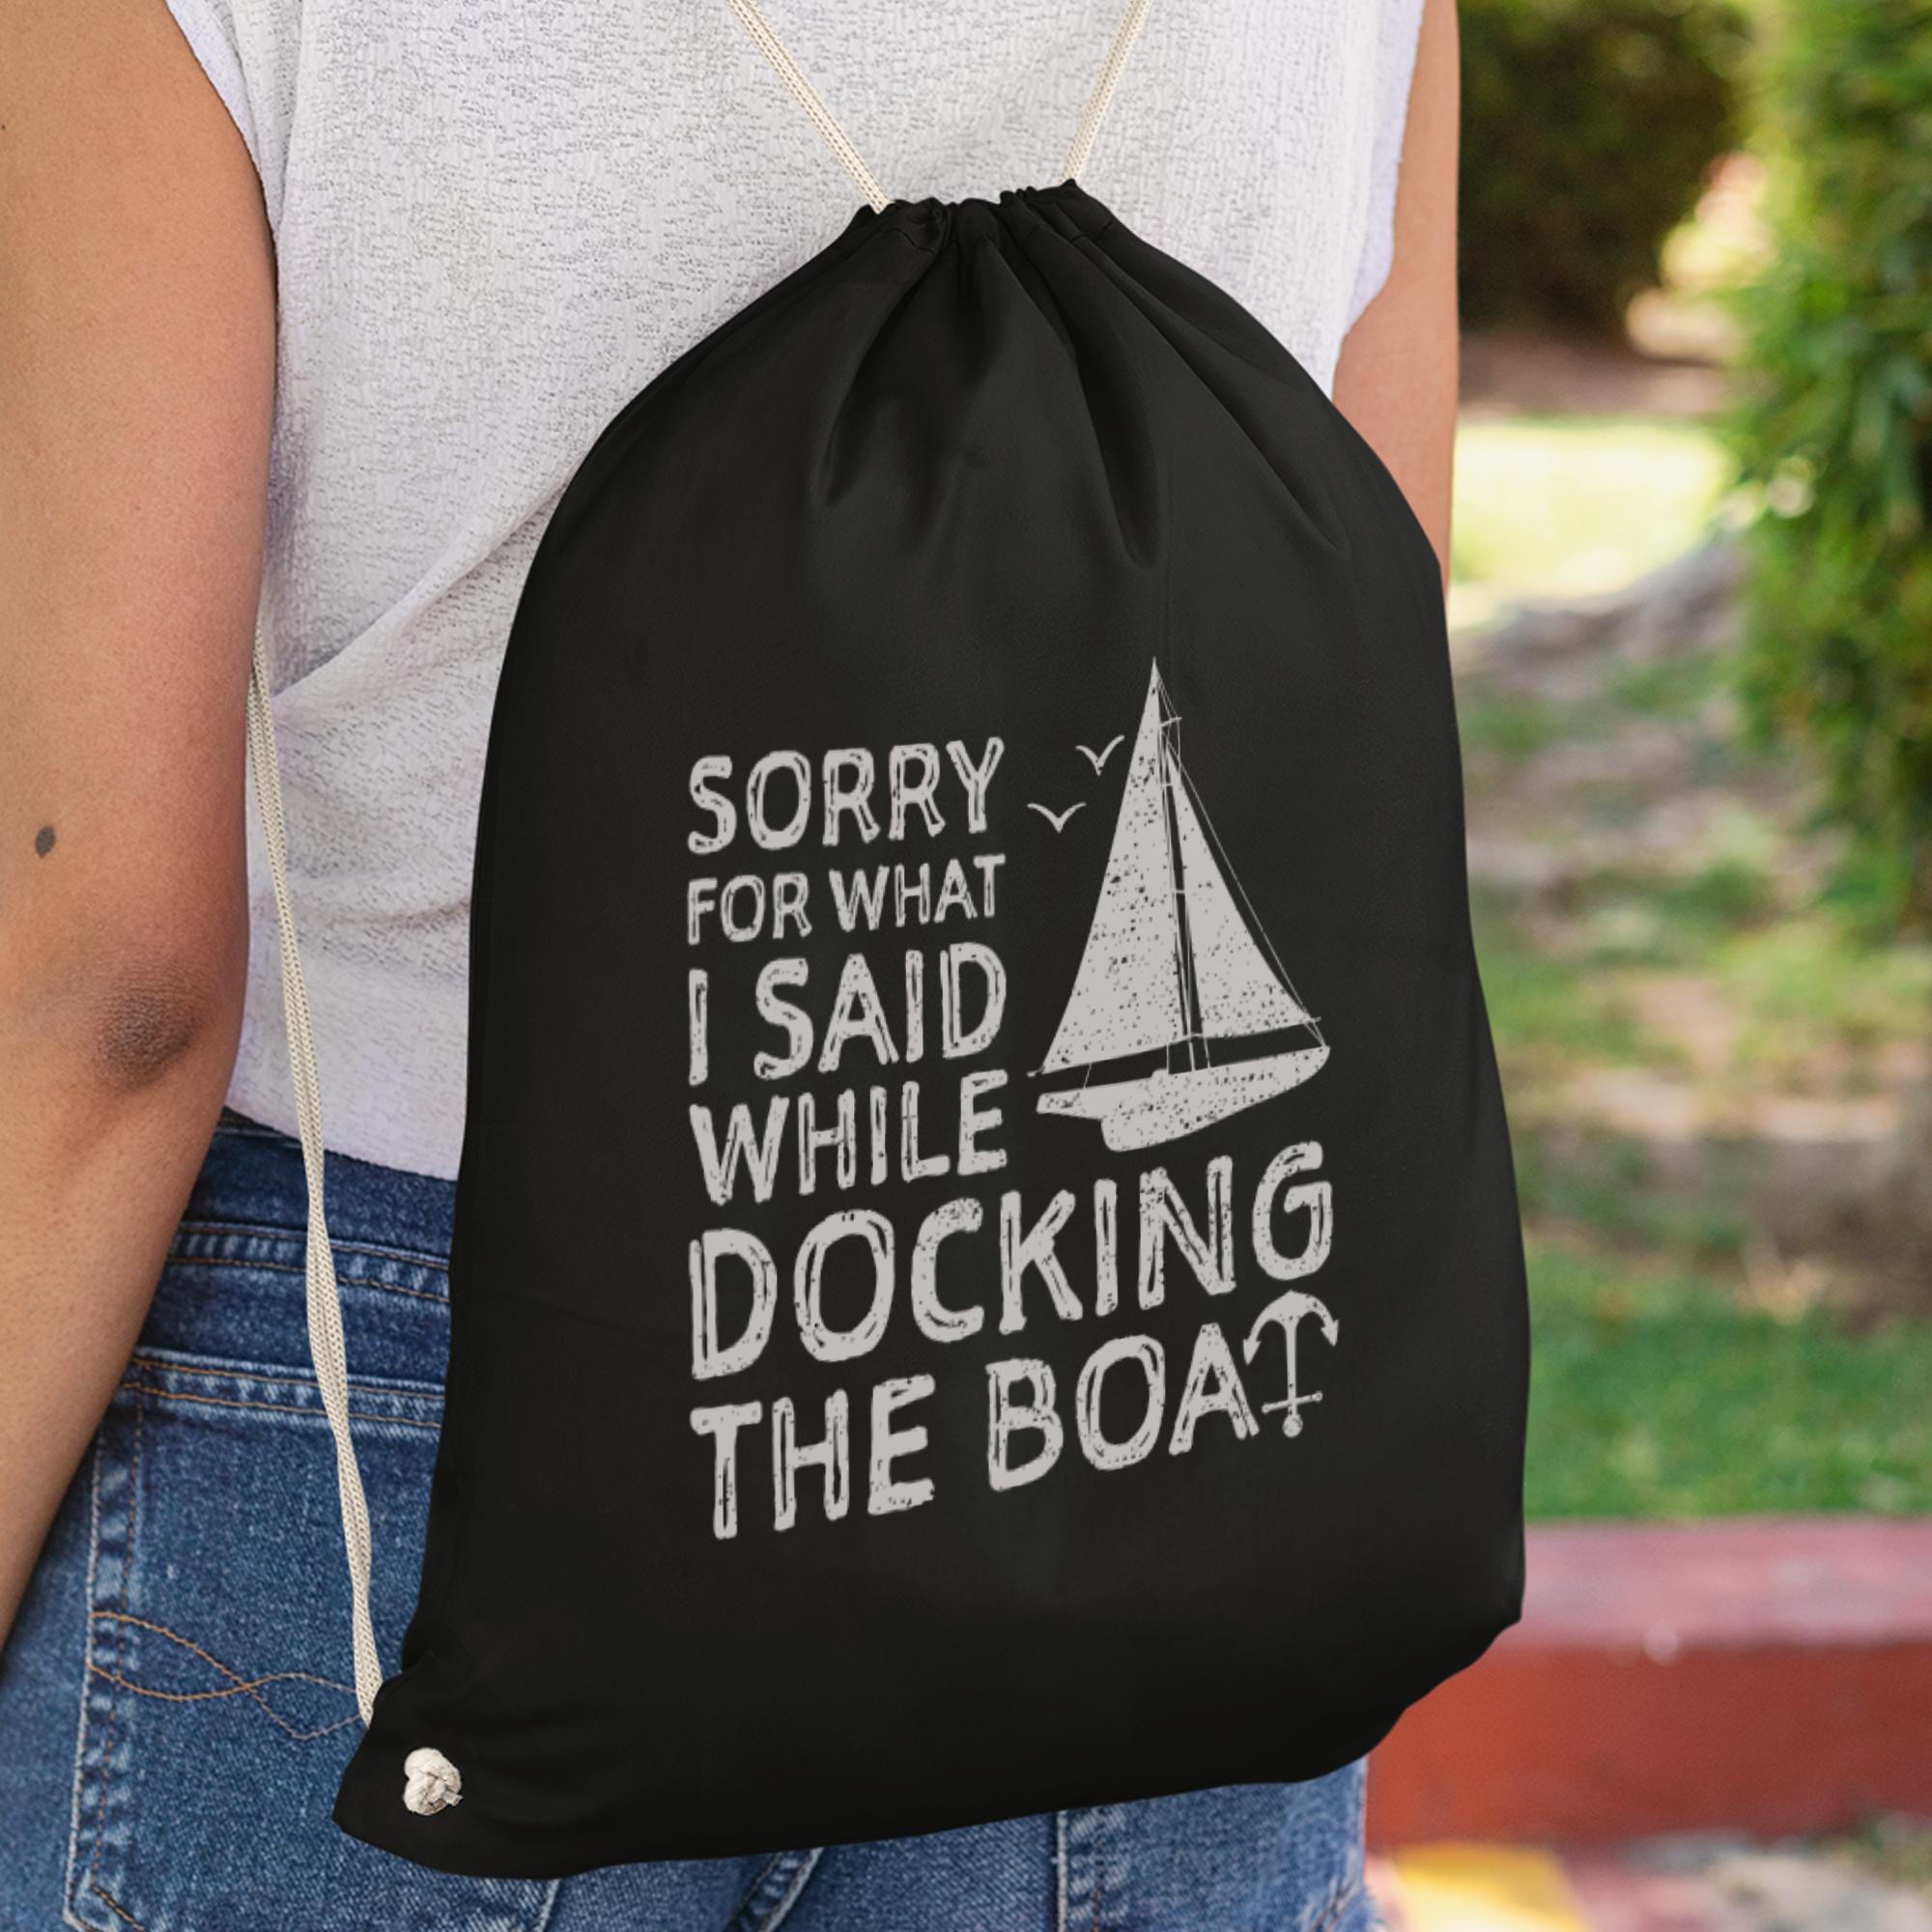 Sorry For What I Said While Docking The Boat Turnbeutel - DESIGNSBYJNK5.COM